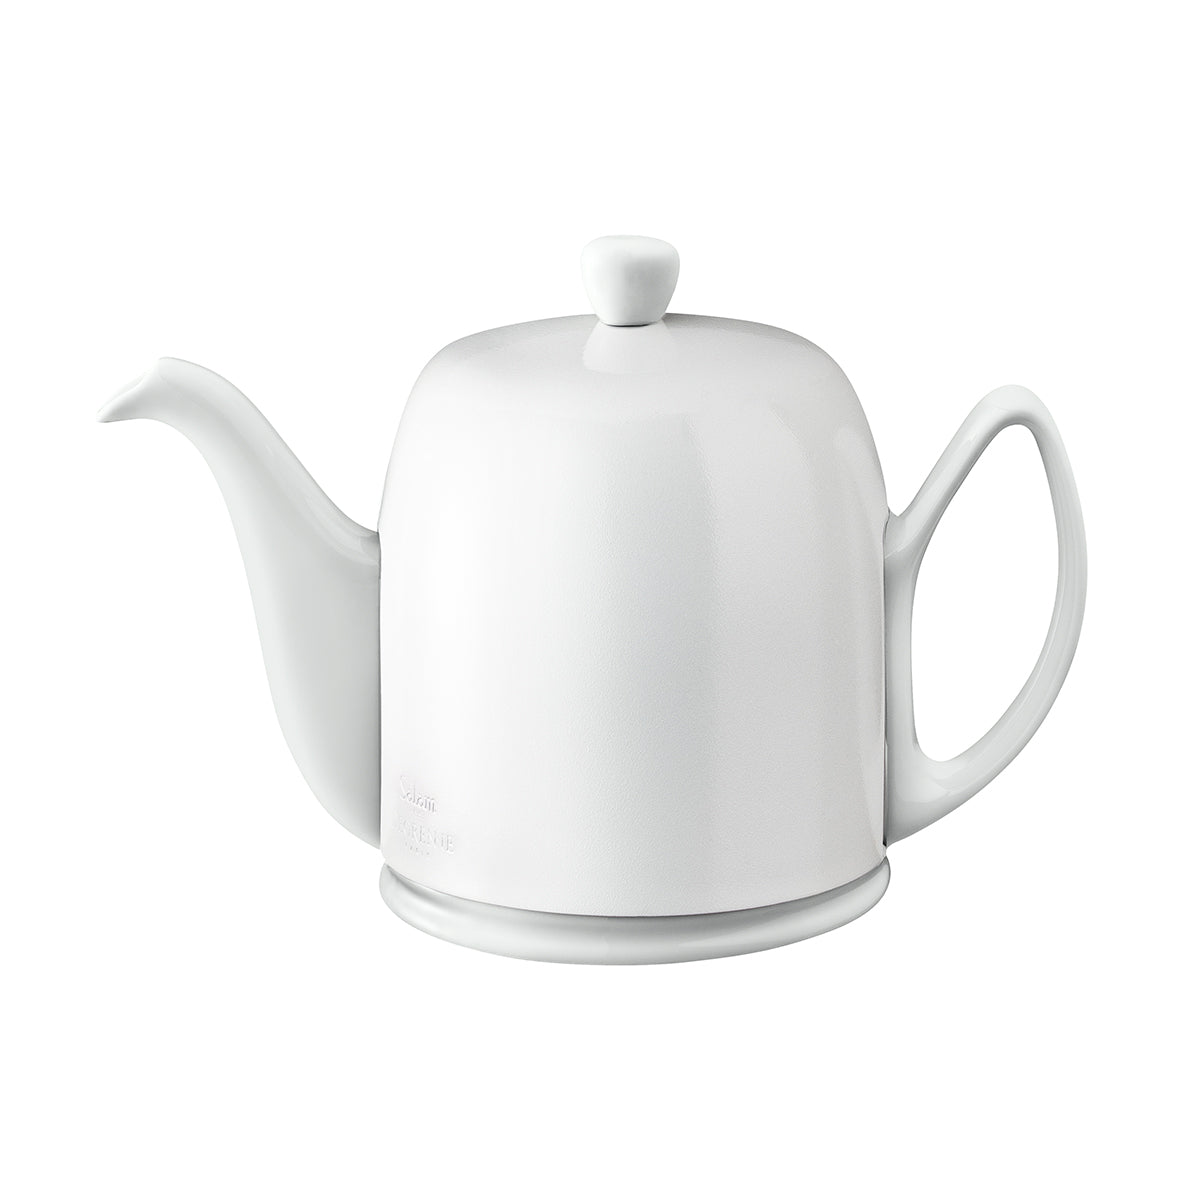 Guy Degrenne Salam Monochrome Green 6 Cup Insulated Teapot, 36 Ounces –  Wine And Tableware